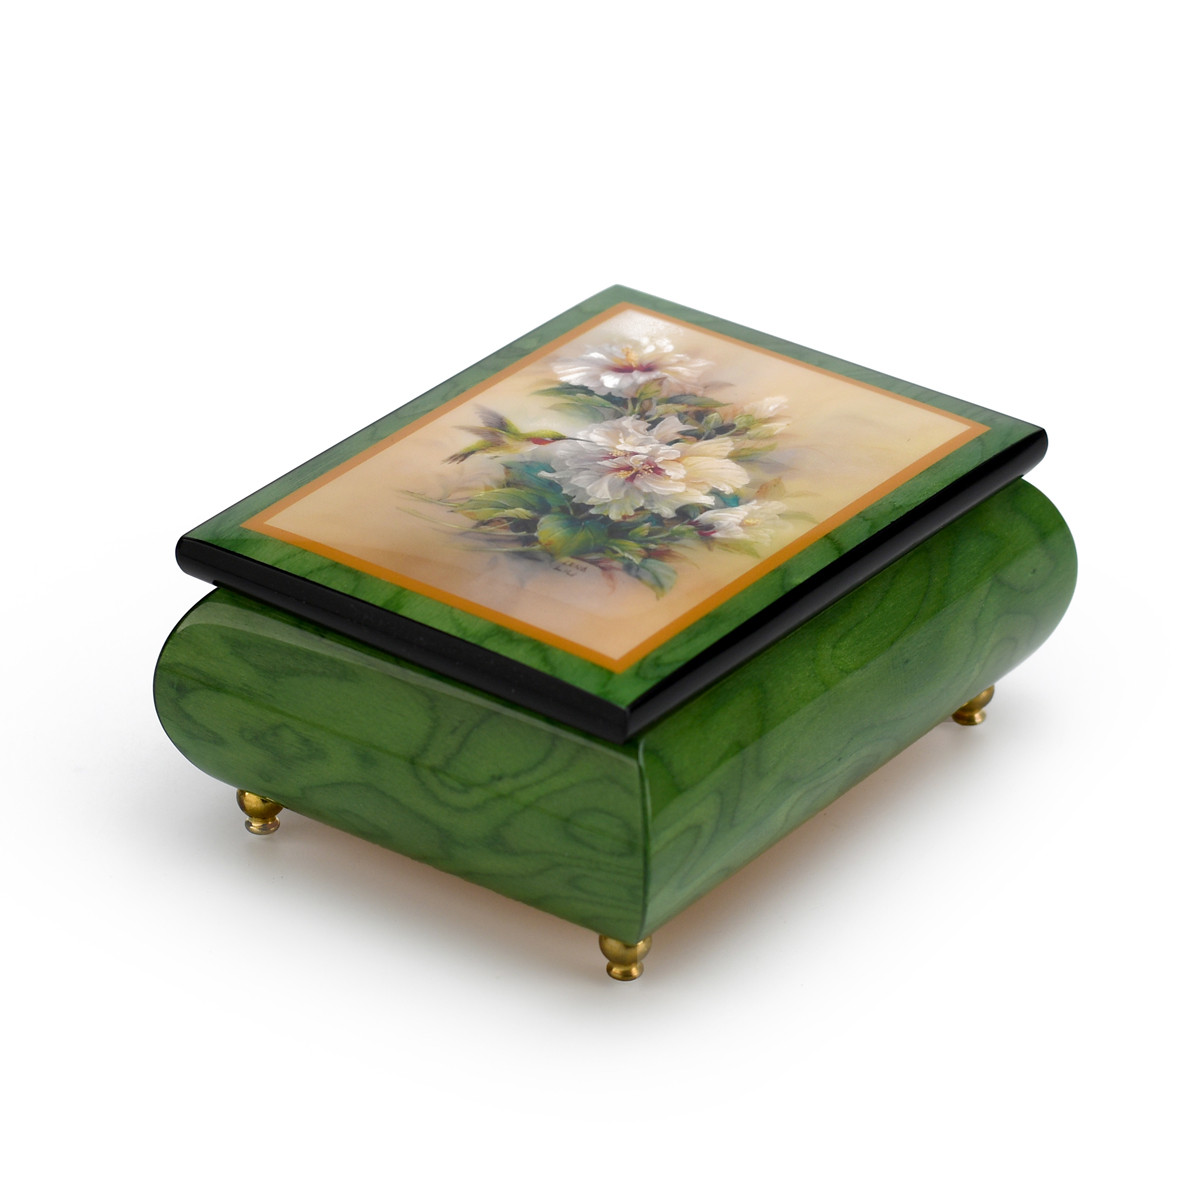 Image of Handcrafted Ercolano Music Box Featuring "Double Hibiscus" by Lena Liu